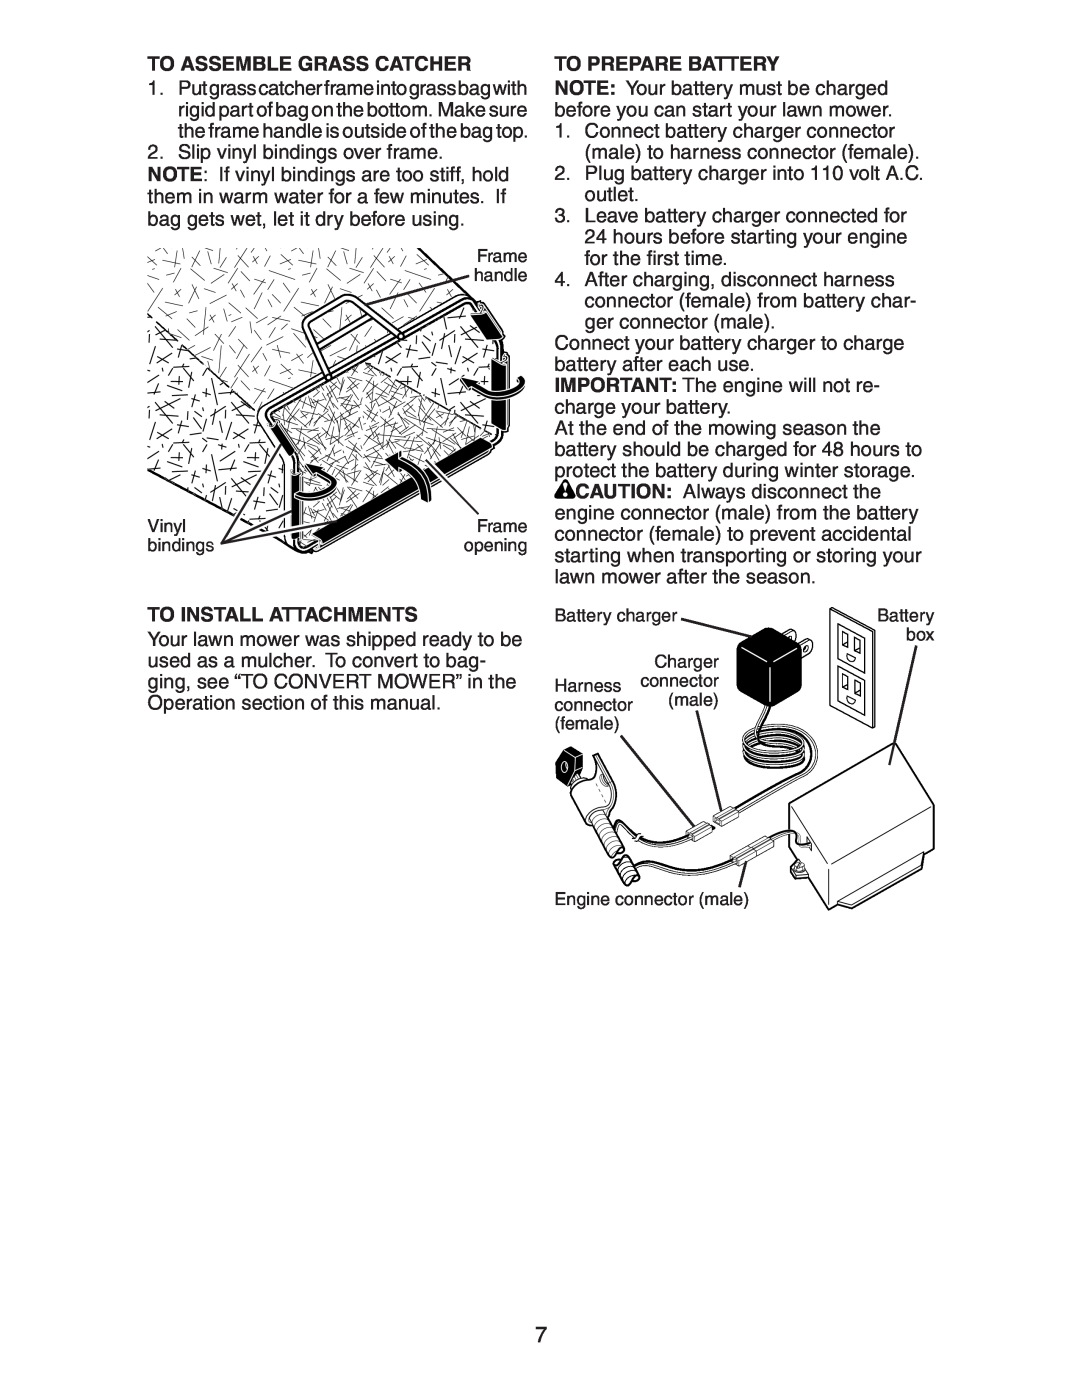 Kenmore 917.37707 owner manual To Assemble Grass Catcher, To Install Attachments, To Prepare Battery 